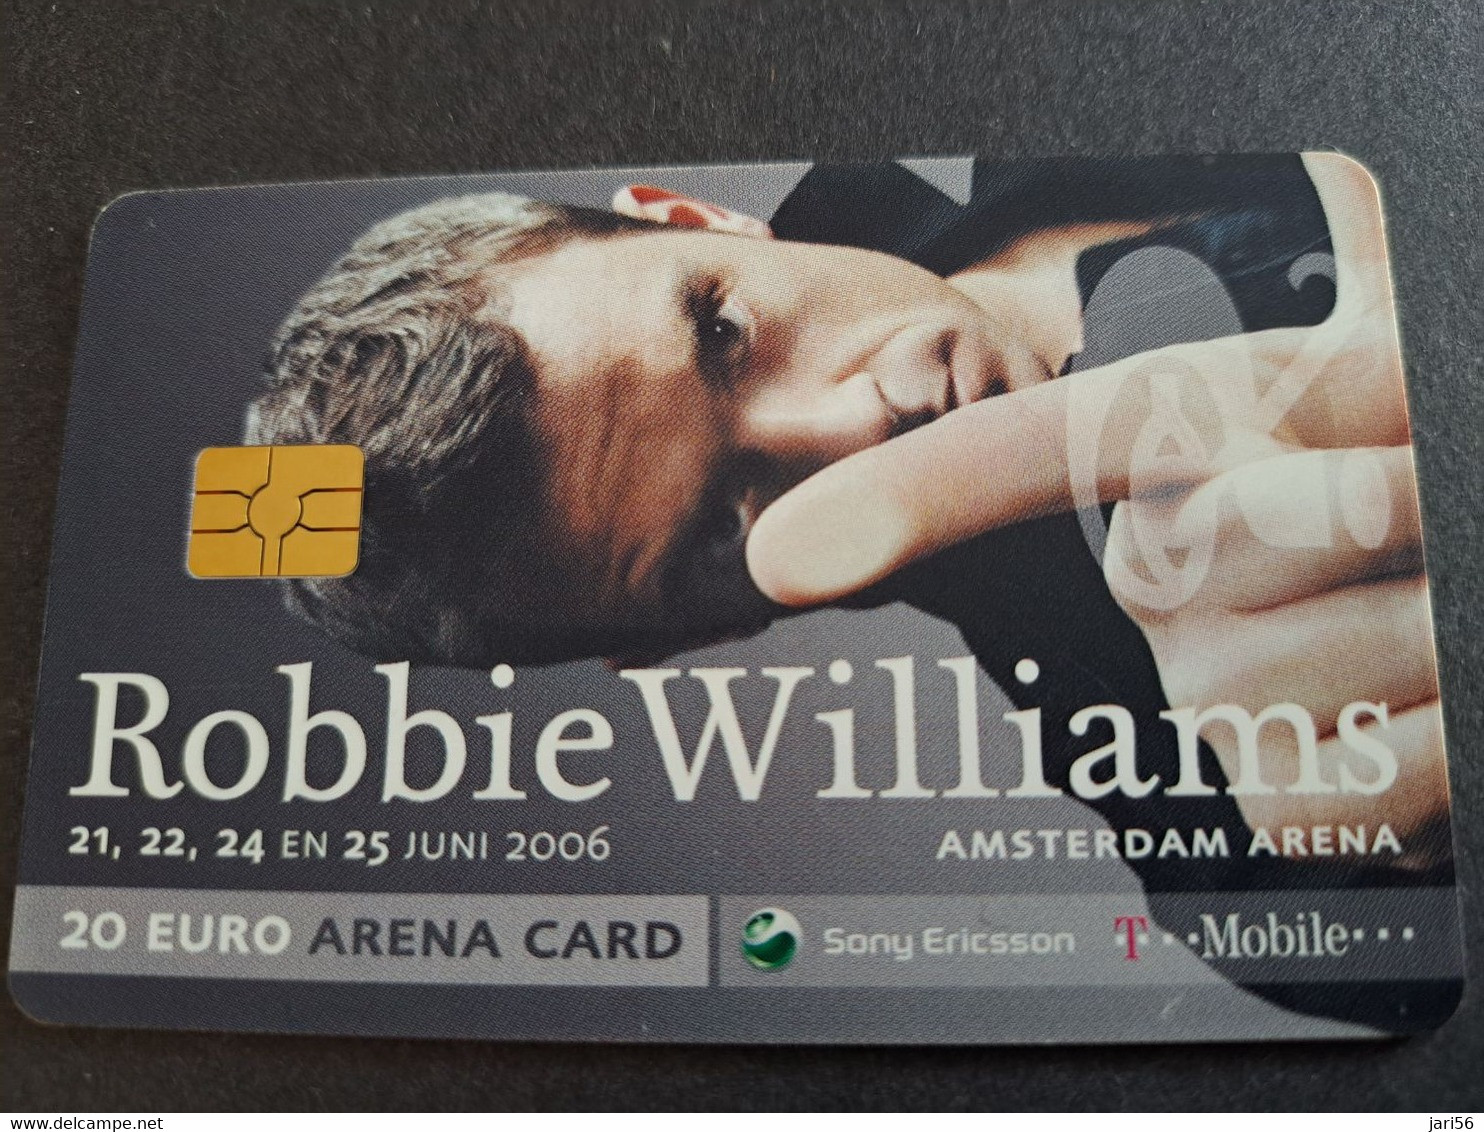 NETHERLANDS CHIPCARD € 20,-  ,- ARENA CARD / ROBBIE WILLIAMS   /MUSIC   - USED CARD  ** 10368** - Pubbliche